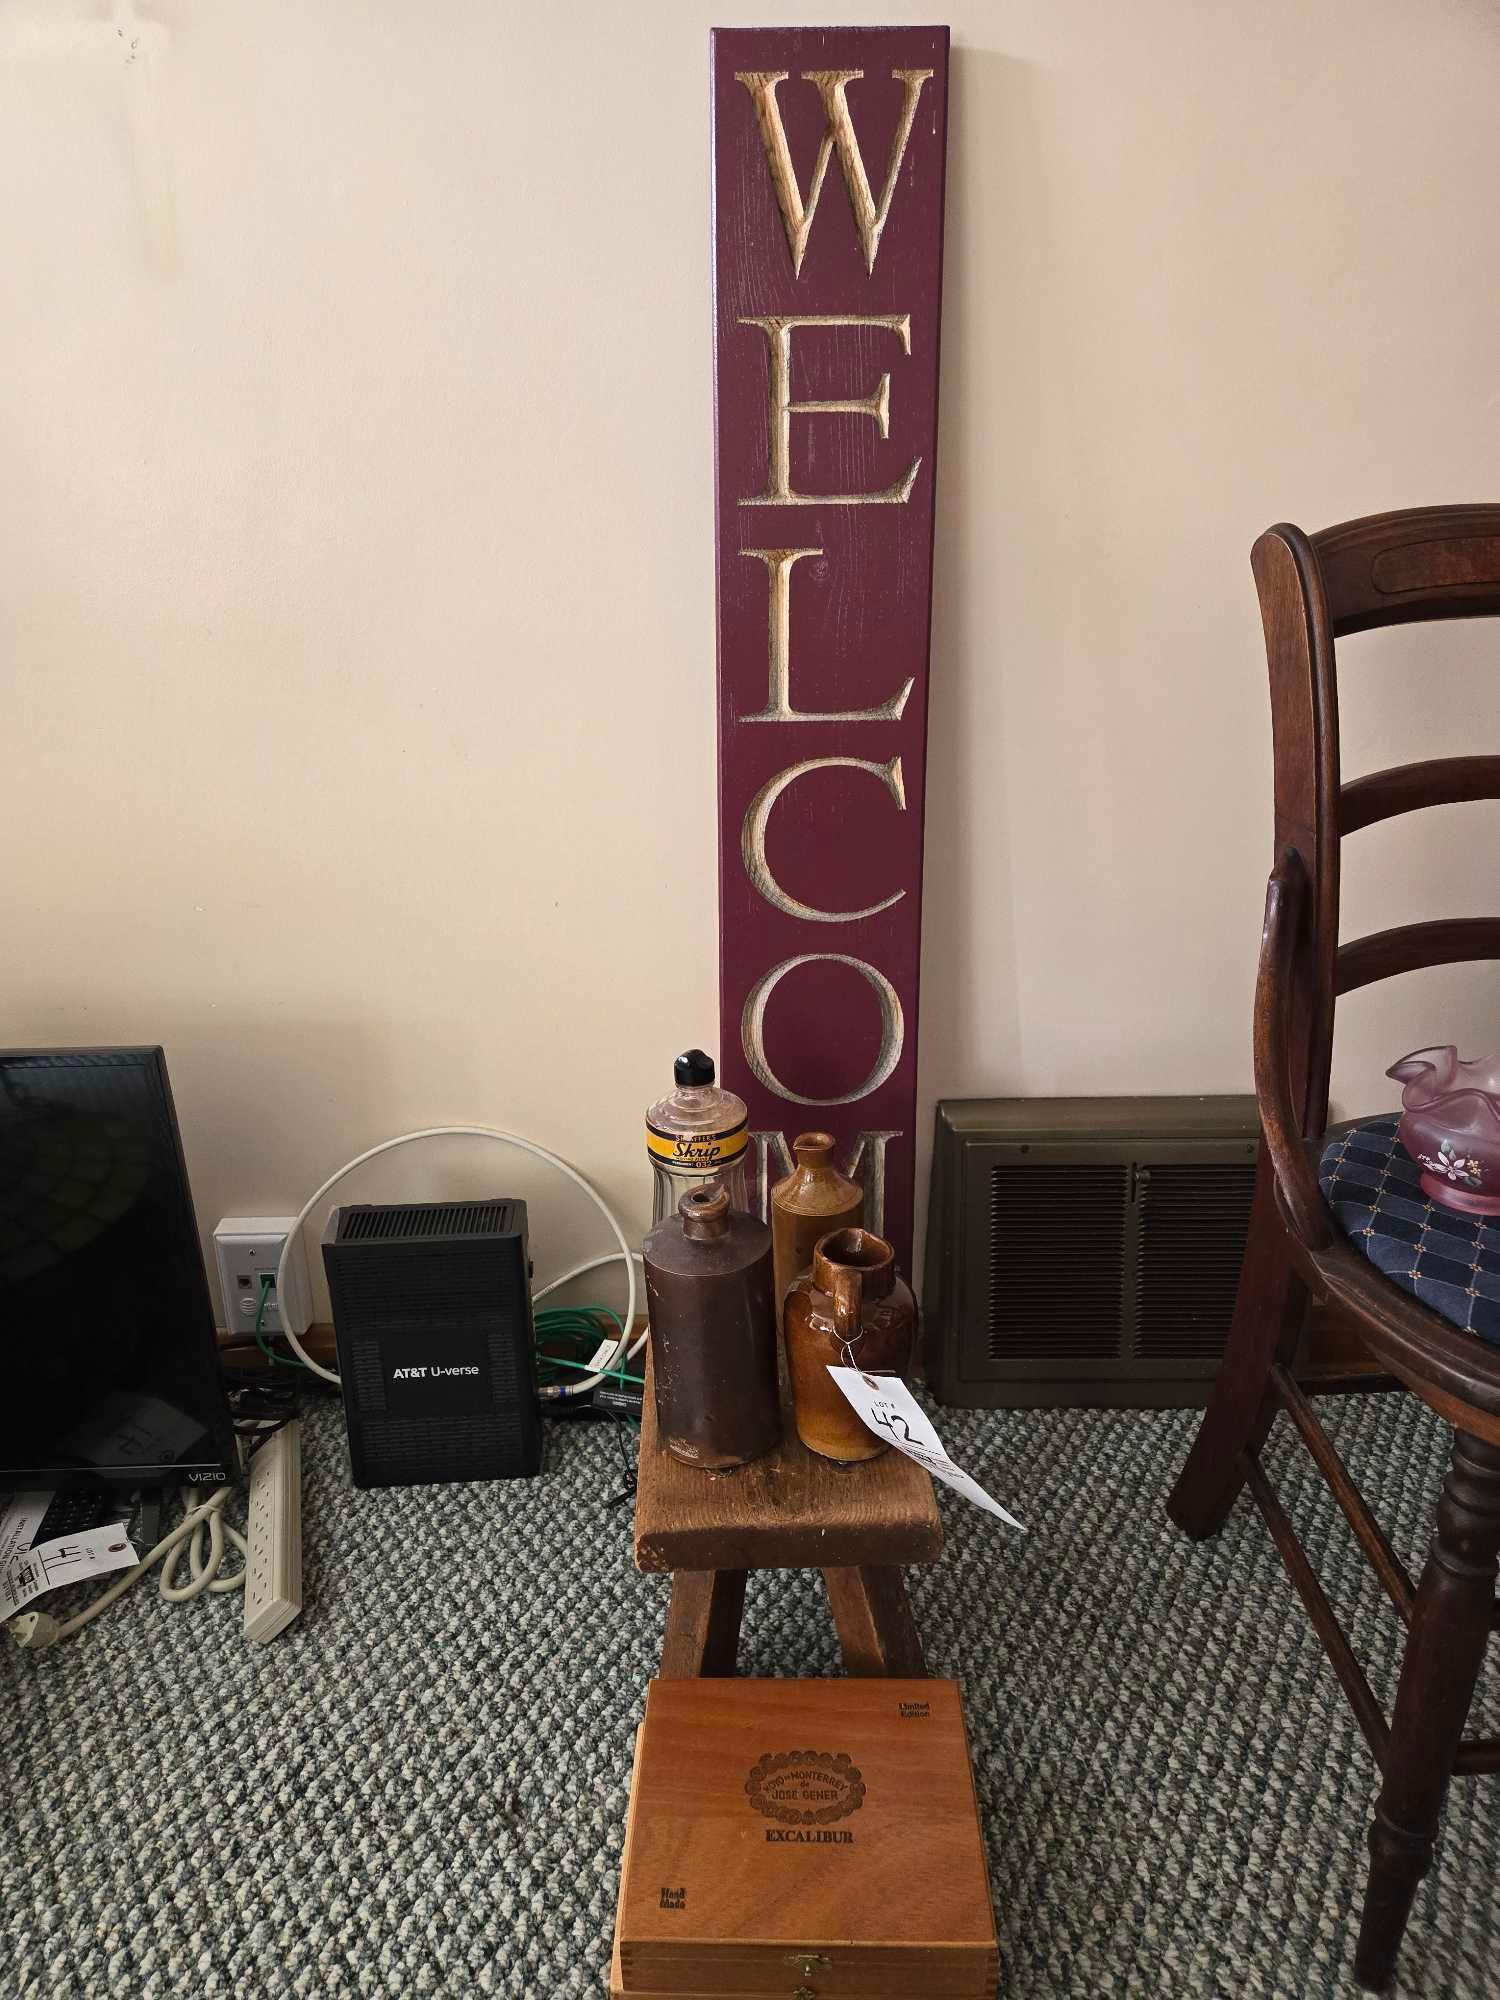 Wooden Stool, Doulten Lambeth Crock Pitcher, Cigar Boxes, Welcome Sign, and Antique Ink Bottles